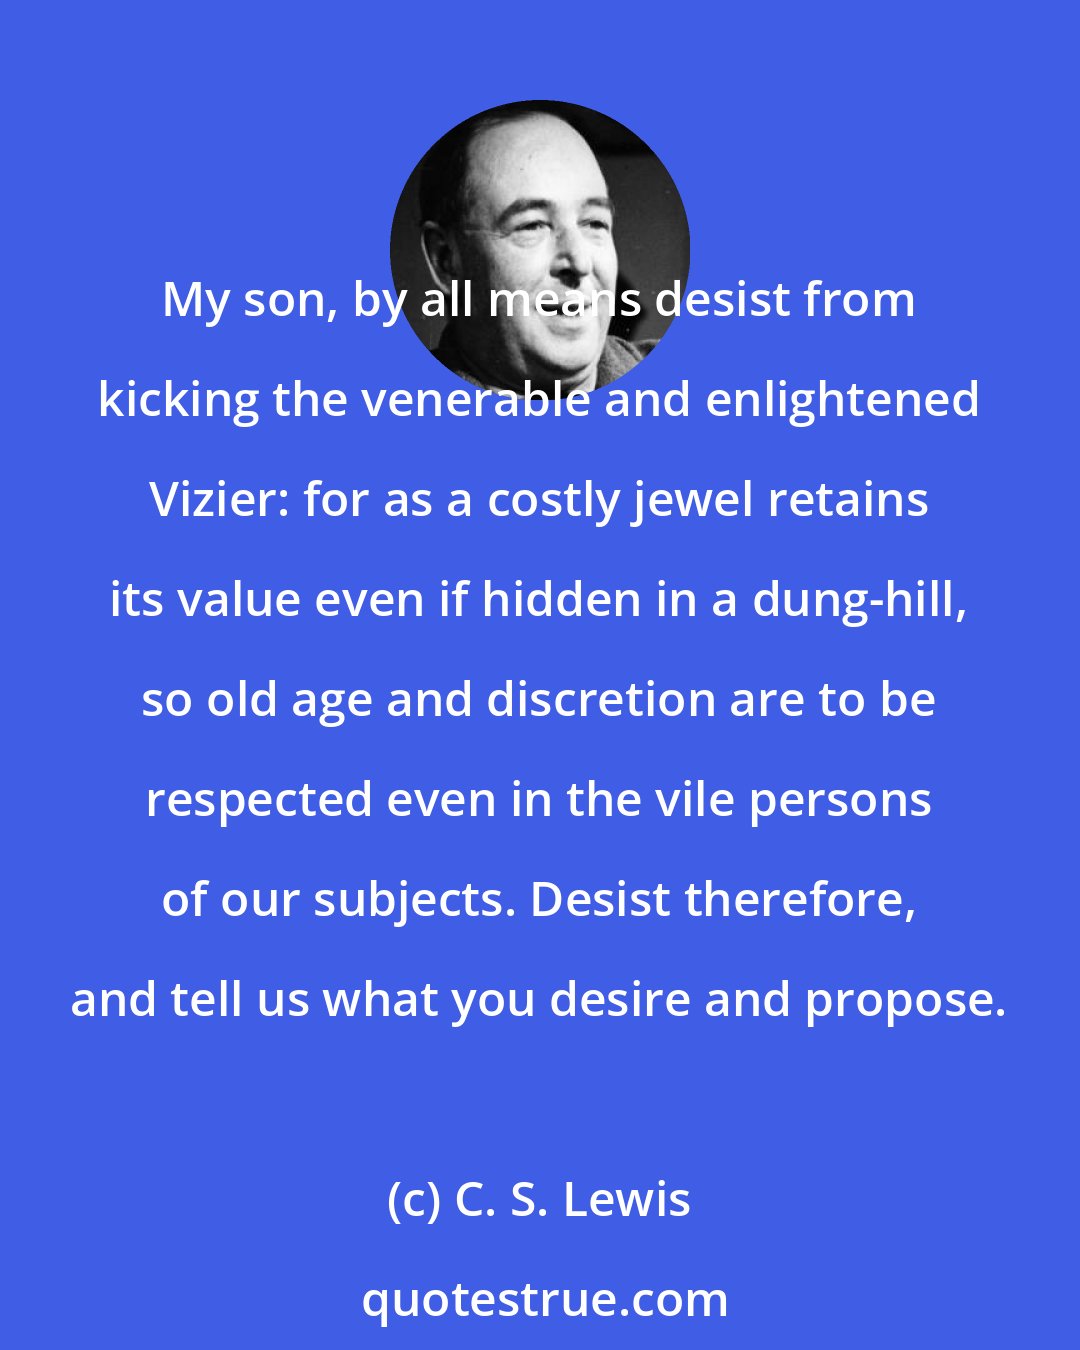 C. S. Lewis: My son, by all means desist from kicking the venerable and enlightened Vizier: for as a costly jewel retains its value even if hidden in a dung-hill, so old age and discretion are to be respected even in the vile persons of our subjects. Desist therefore, and tell us what you desire and propose.